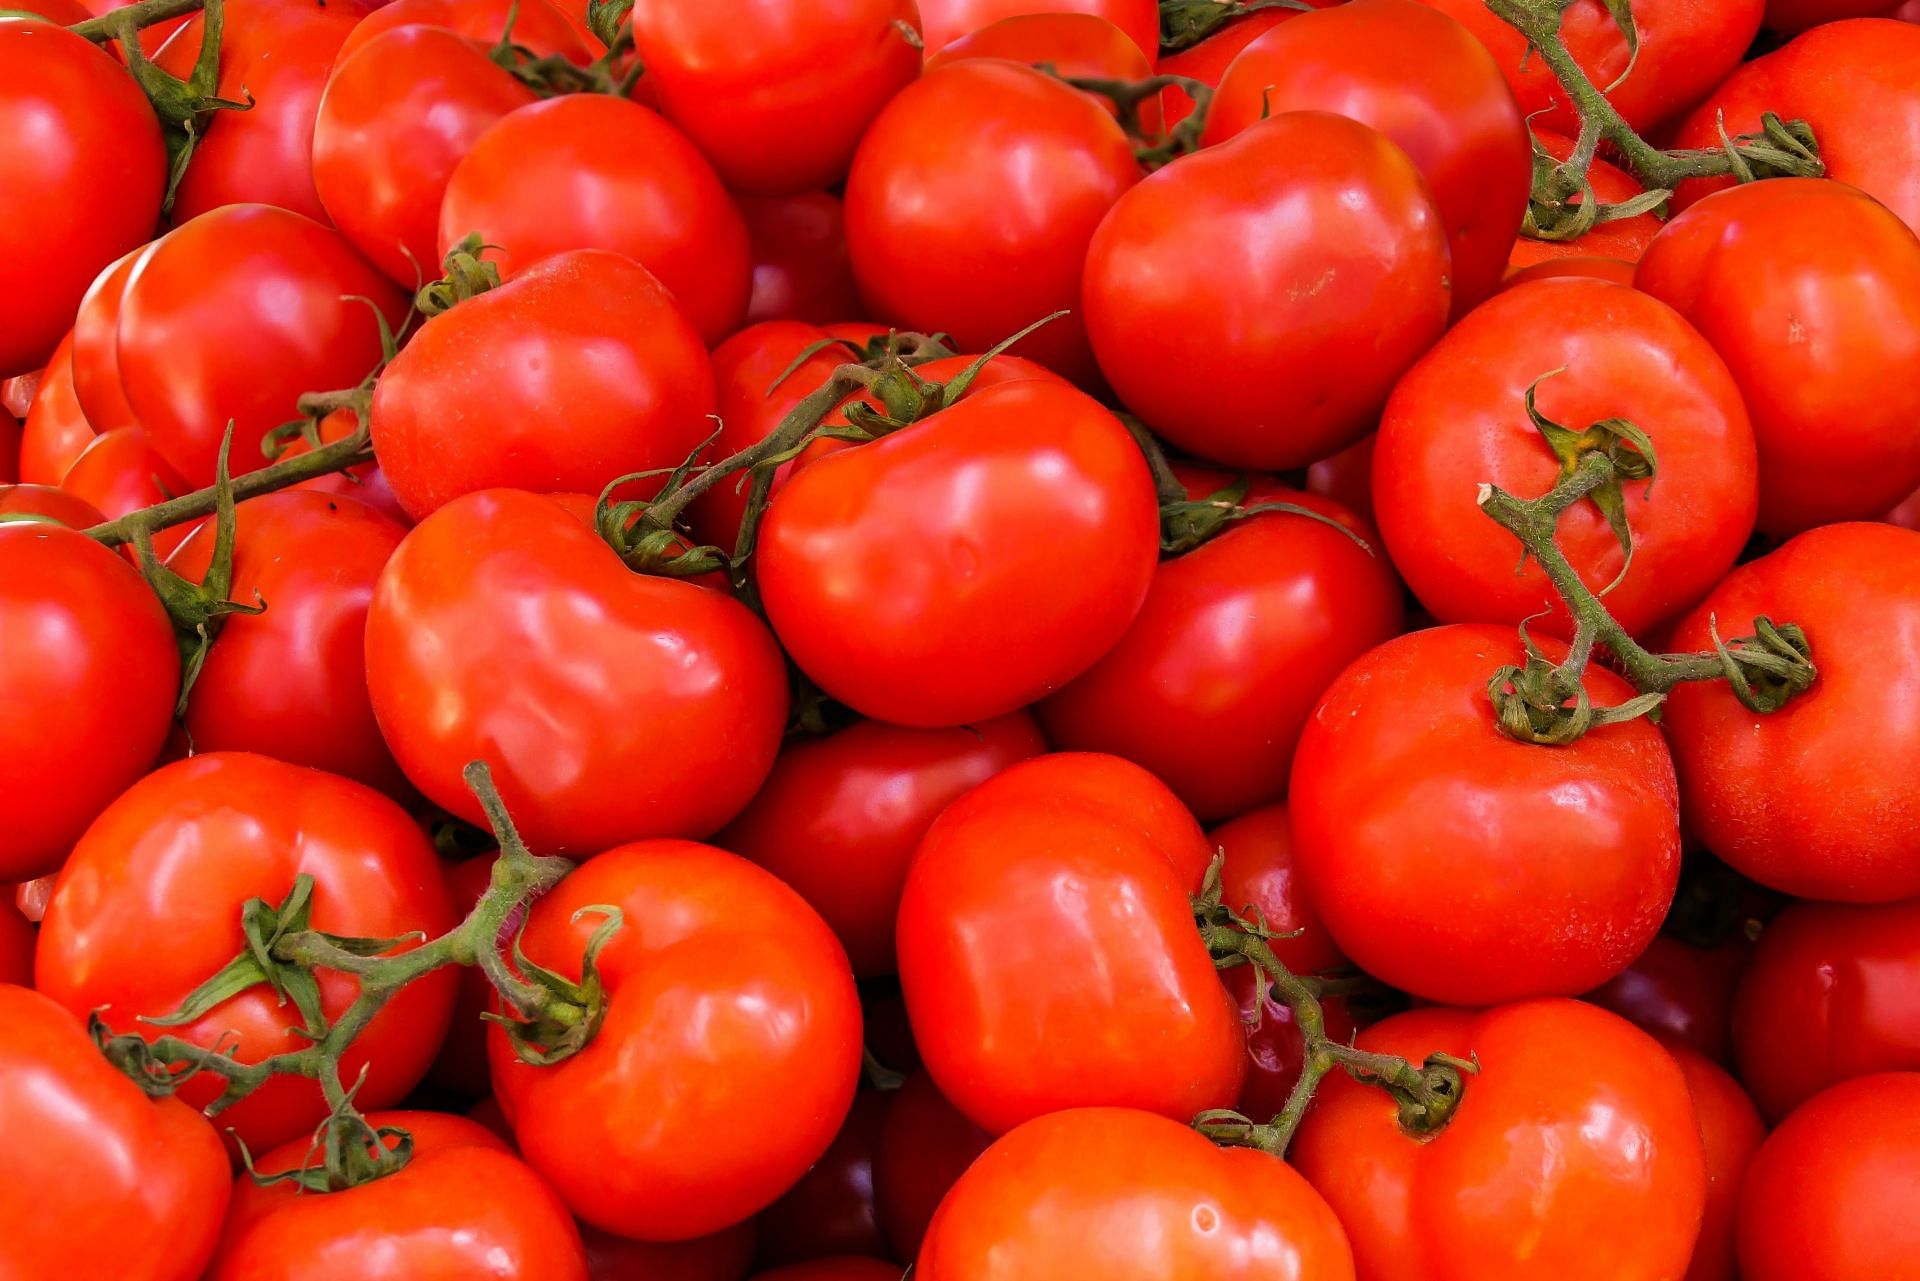 Incredible health benefits of heirloom tomatoes (image sourced via Pexels / Photo by pixabay)